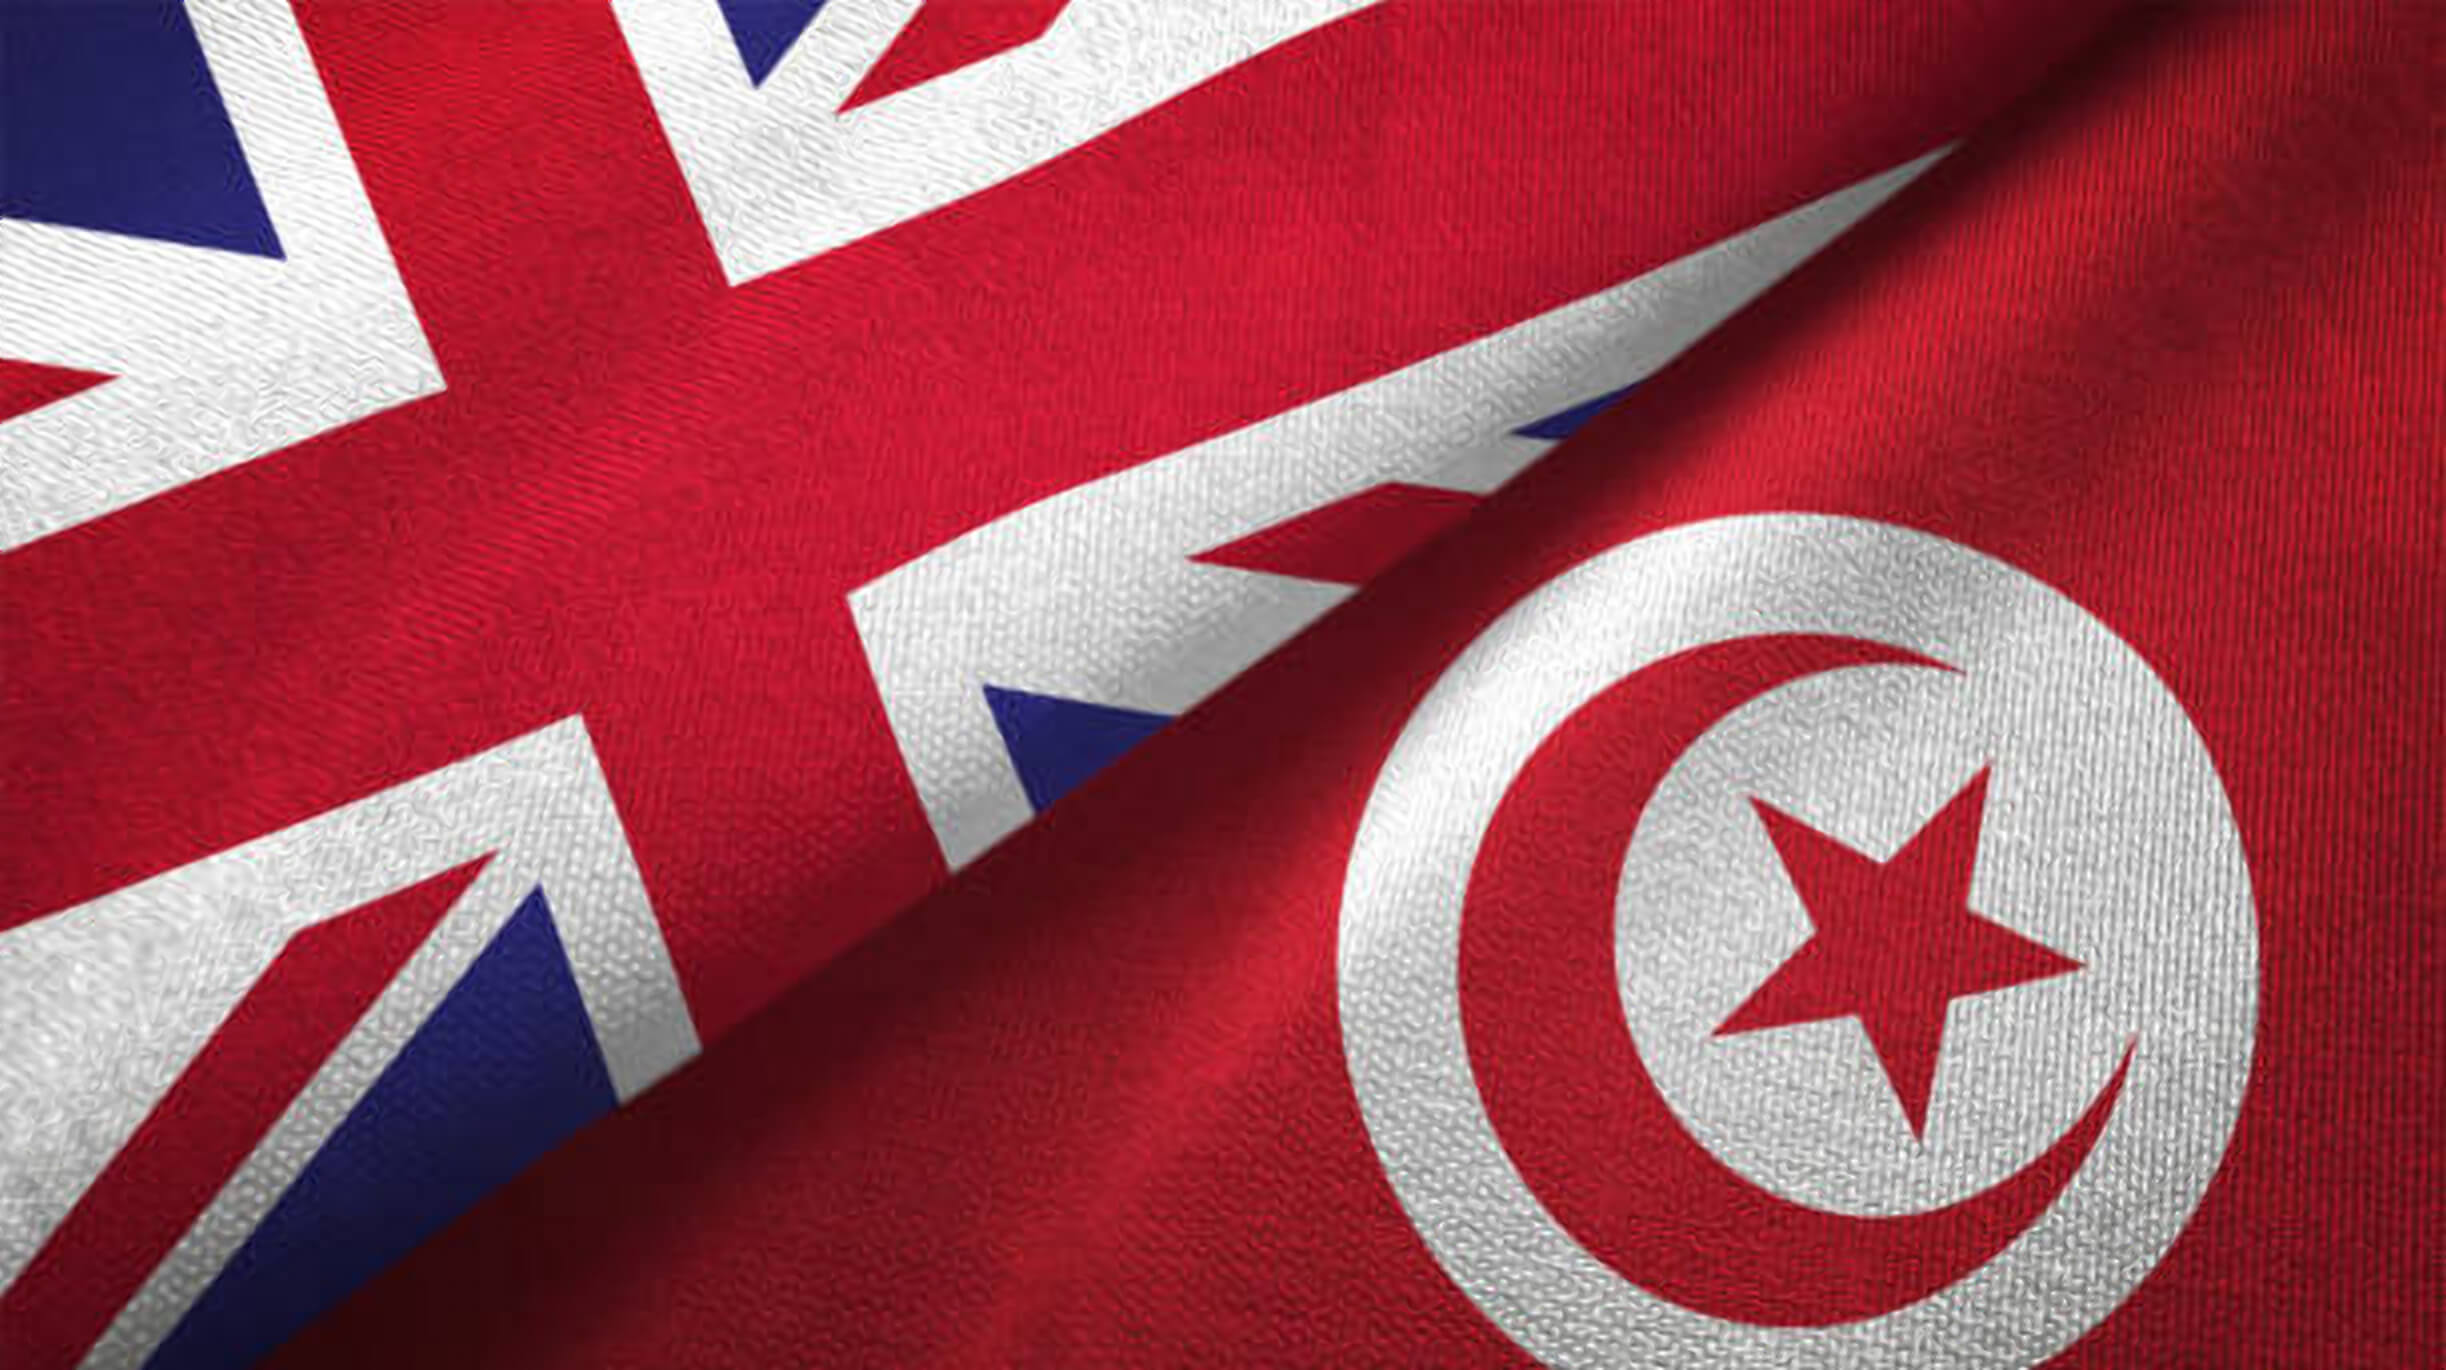 Britain and Tunisia announced efforts to develop strategy to combat terrorism